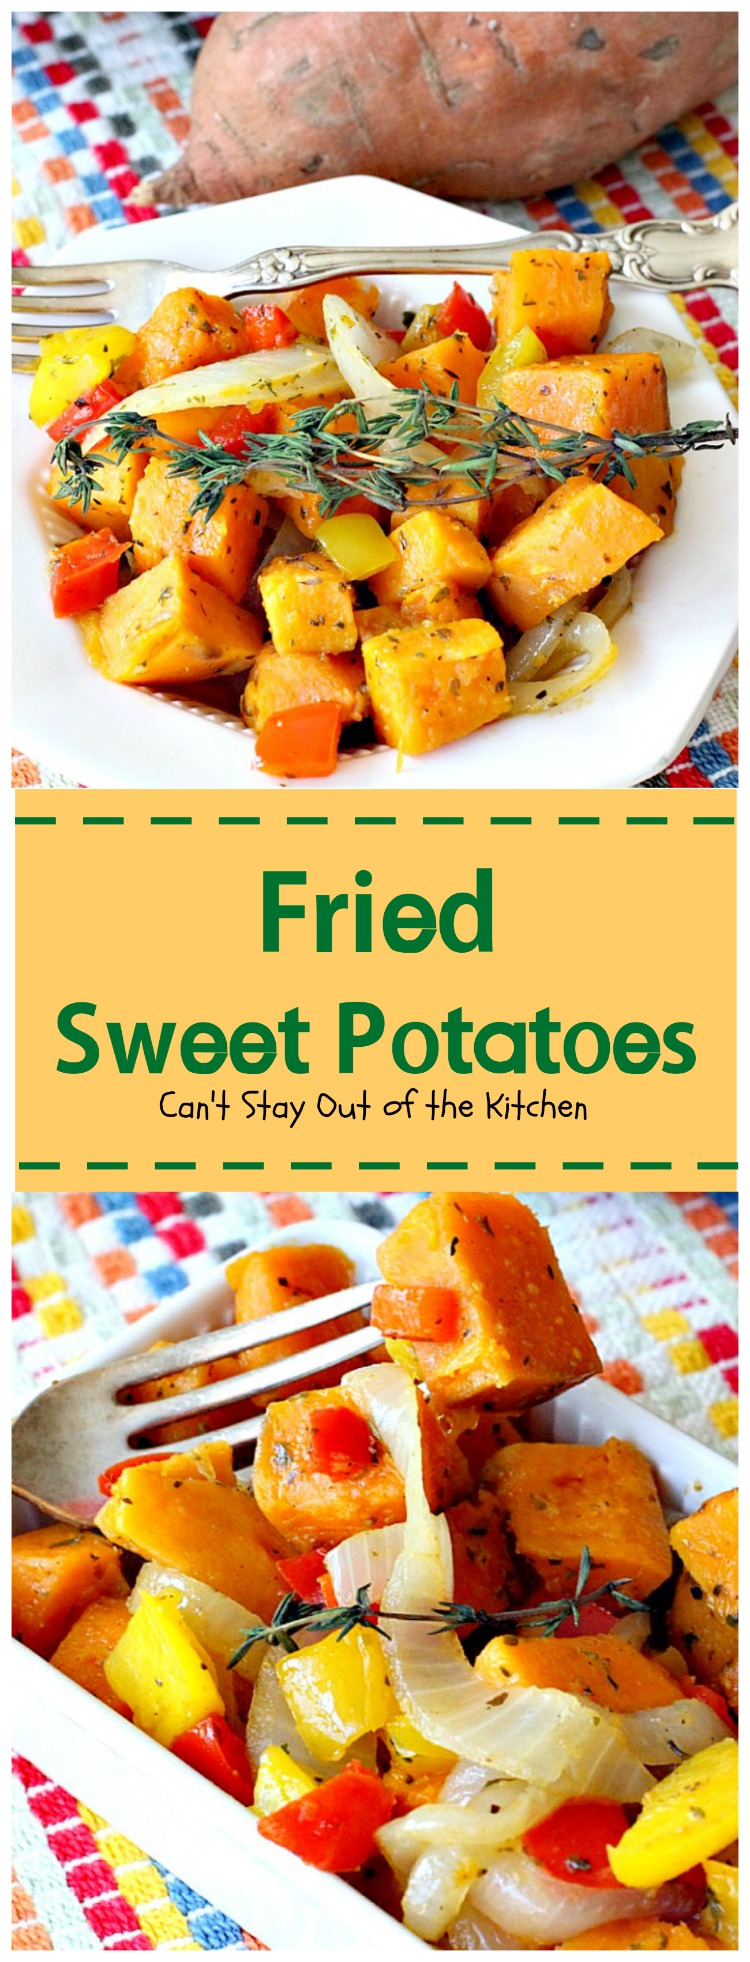 Fried Sweet Potatoes | Can't Stay Out of the Kitchen